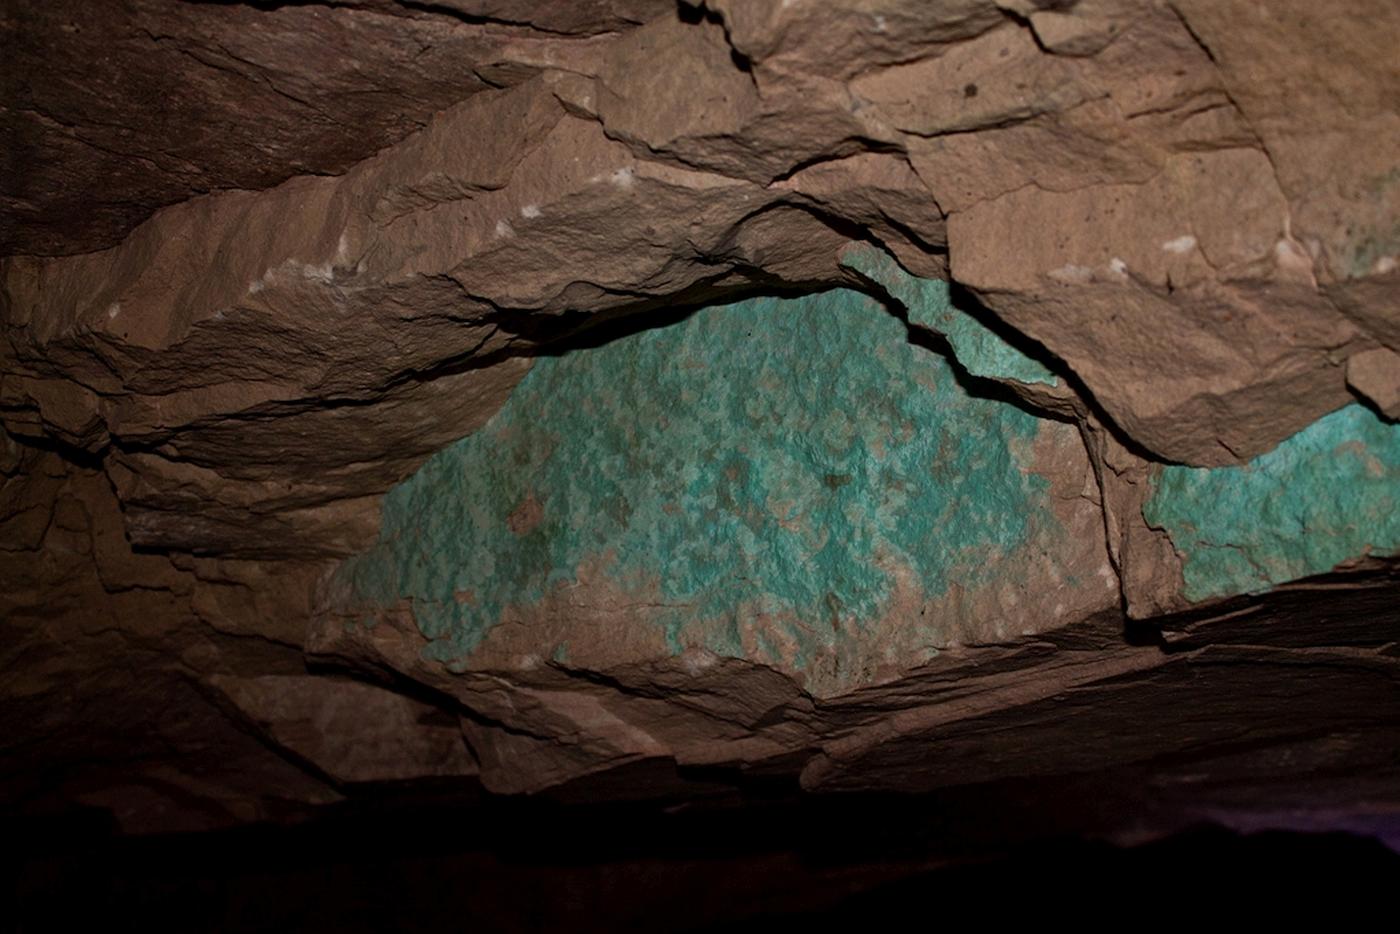 An image of the inside of a Wadi Faynan mine. The blue coloring shows a vein of copper.